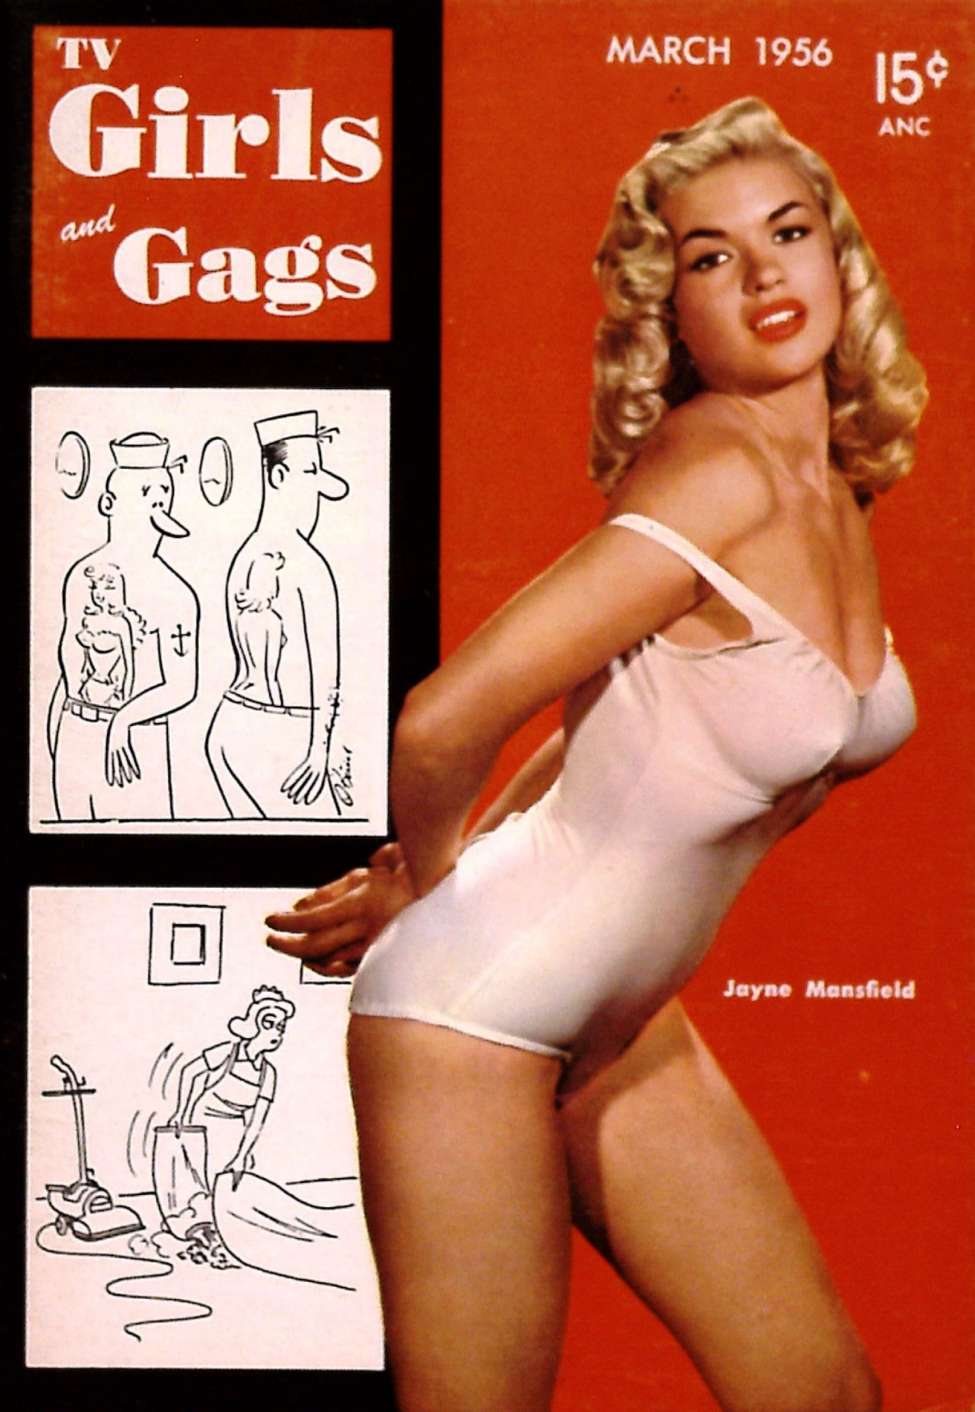 Book Cover For TV Girls and Gags v2 5